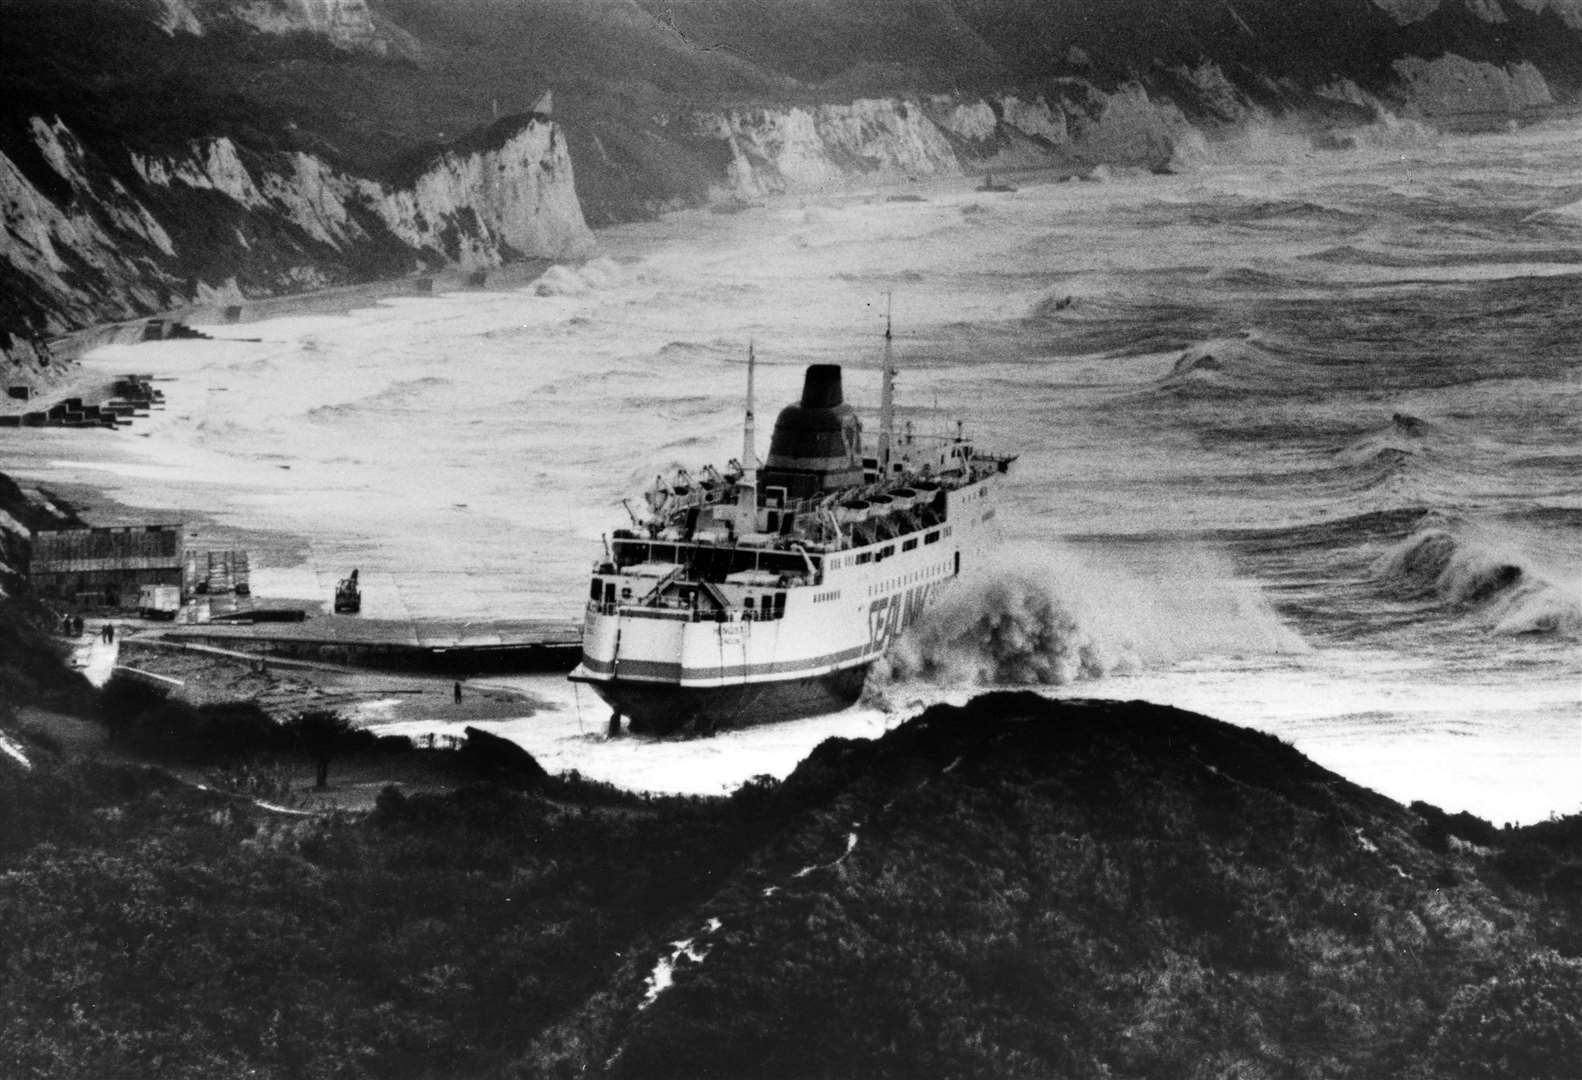 The Sealink passenger ferry Hengist beached at Folkestone after the storm. Picture: Paul Amos.